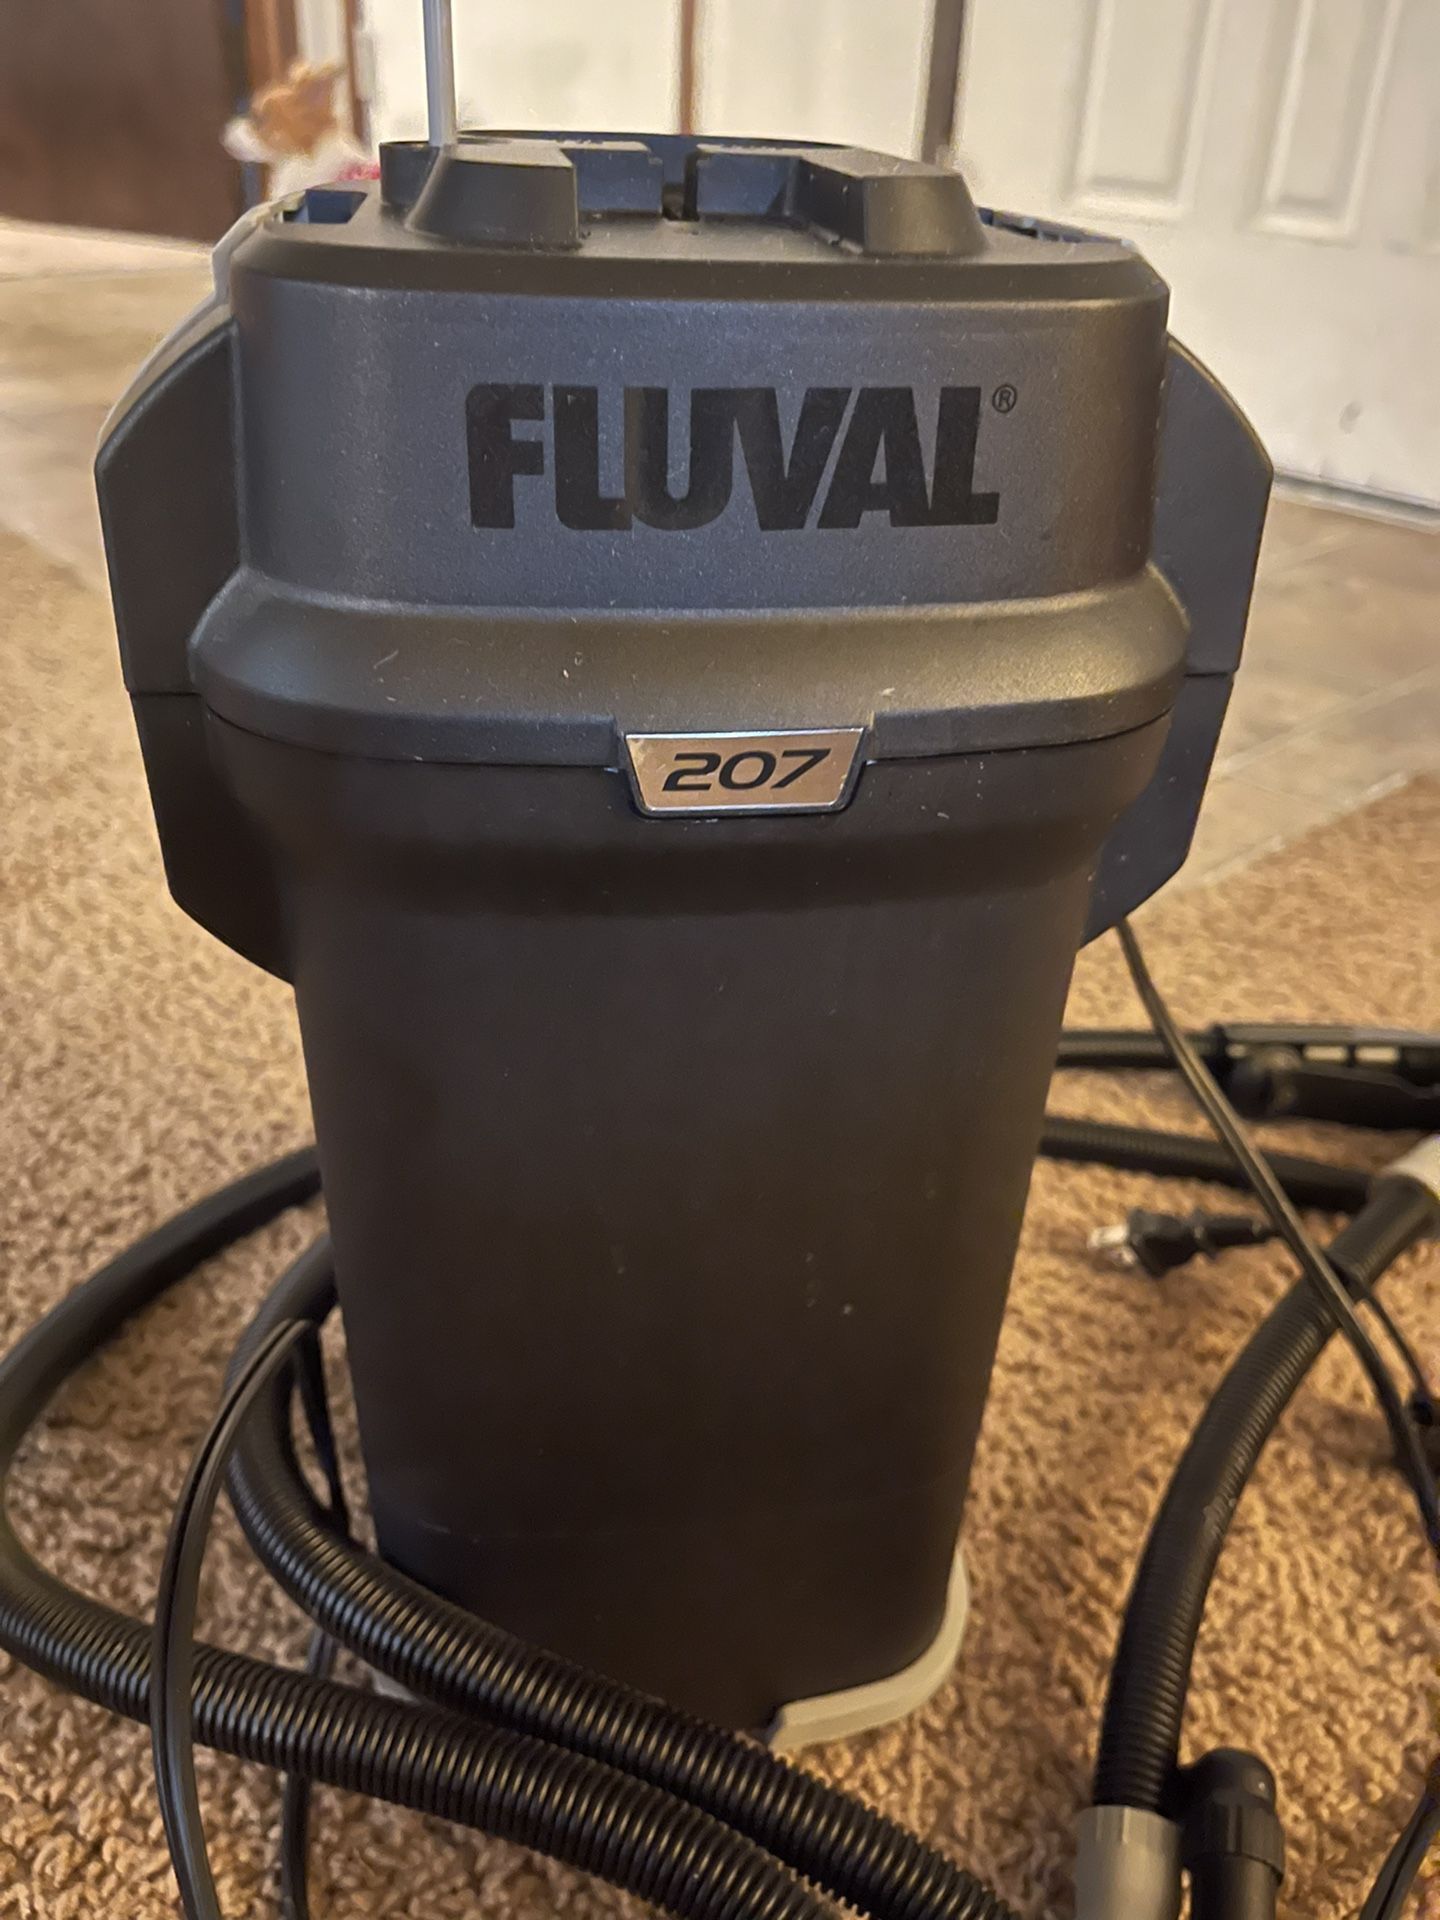 Fluval  207 External Canister Filter For Up To 45 Gallon Tank